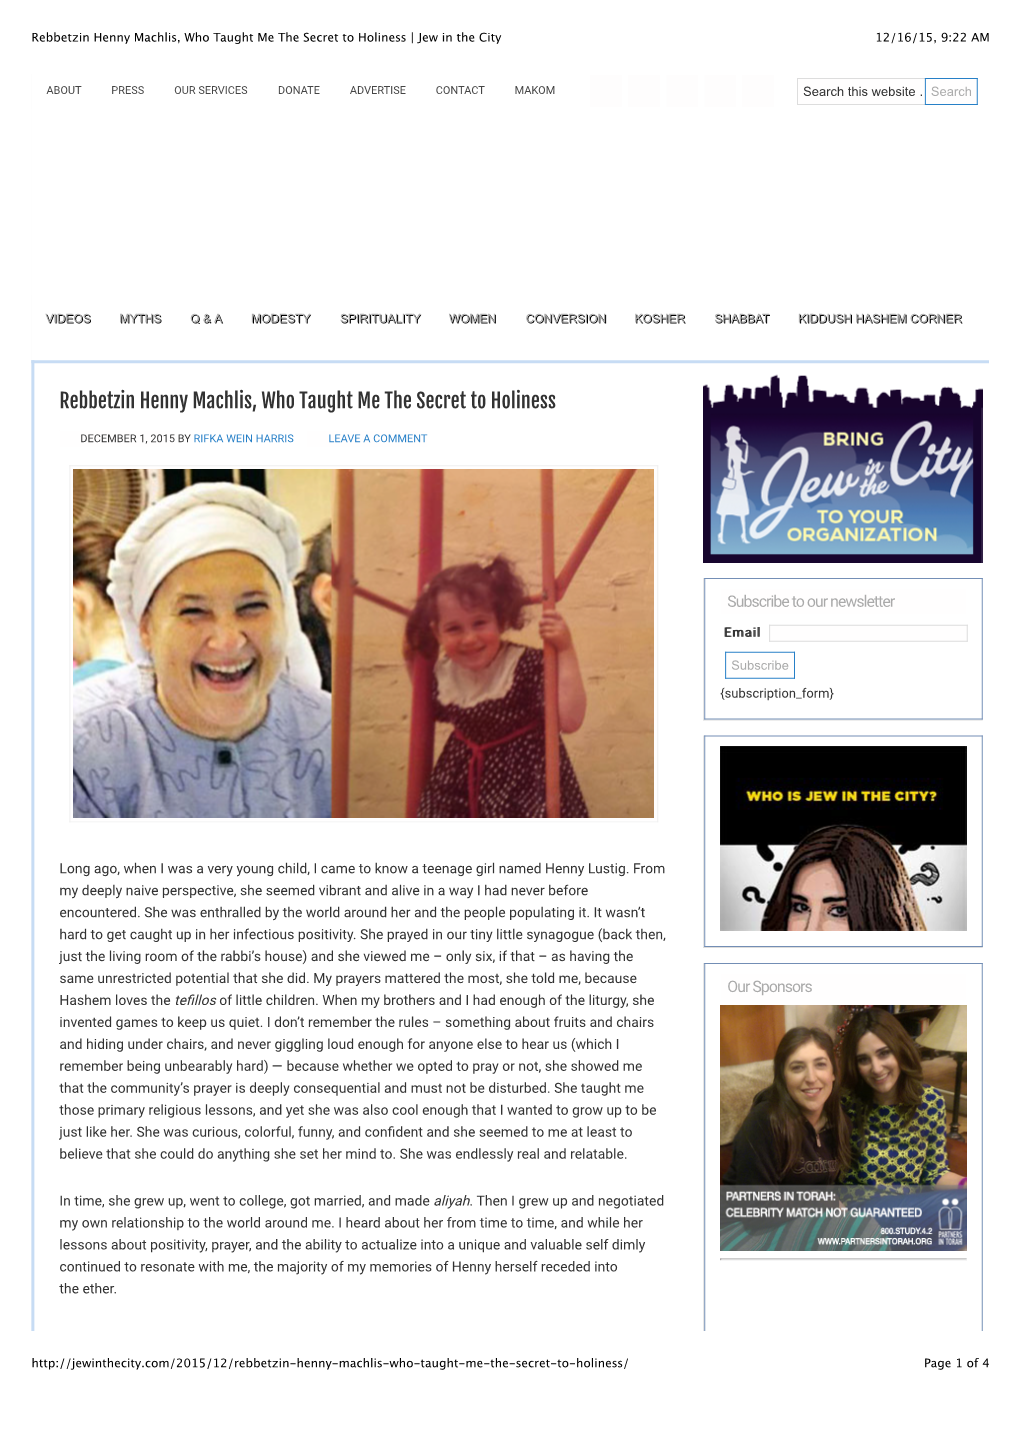 Rebbetzin Henny Machlis, Who Taught Me the Secret to Holiness | Jew in the City 12/16/15, 9:22 AM